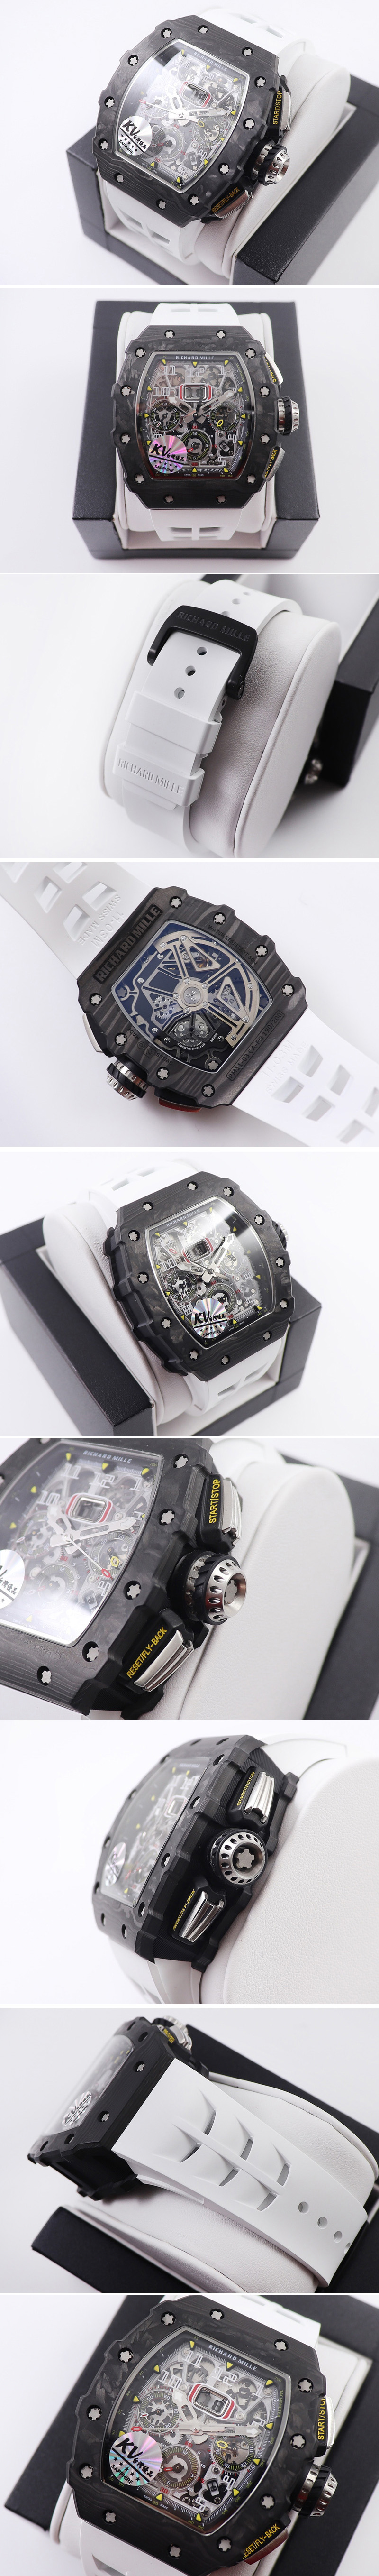 Replica Richard Mille  RM011 NTPT Chrono KVF 1:1 Best Edition Crystal Dial on White Rubber Strap A7750